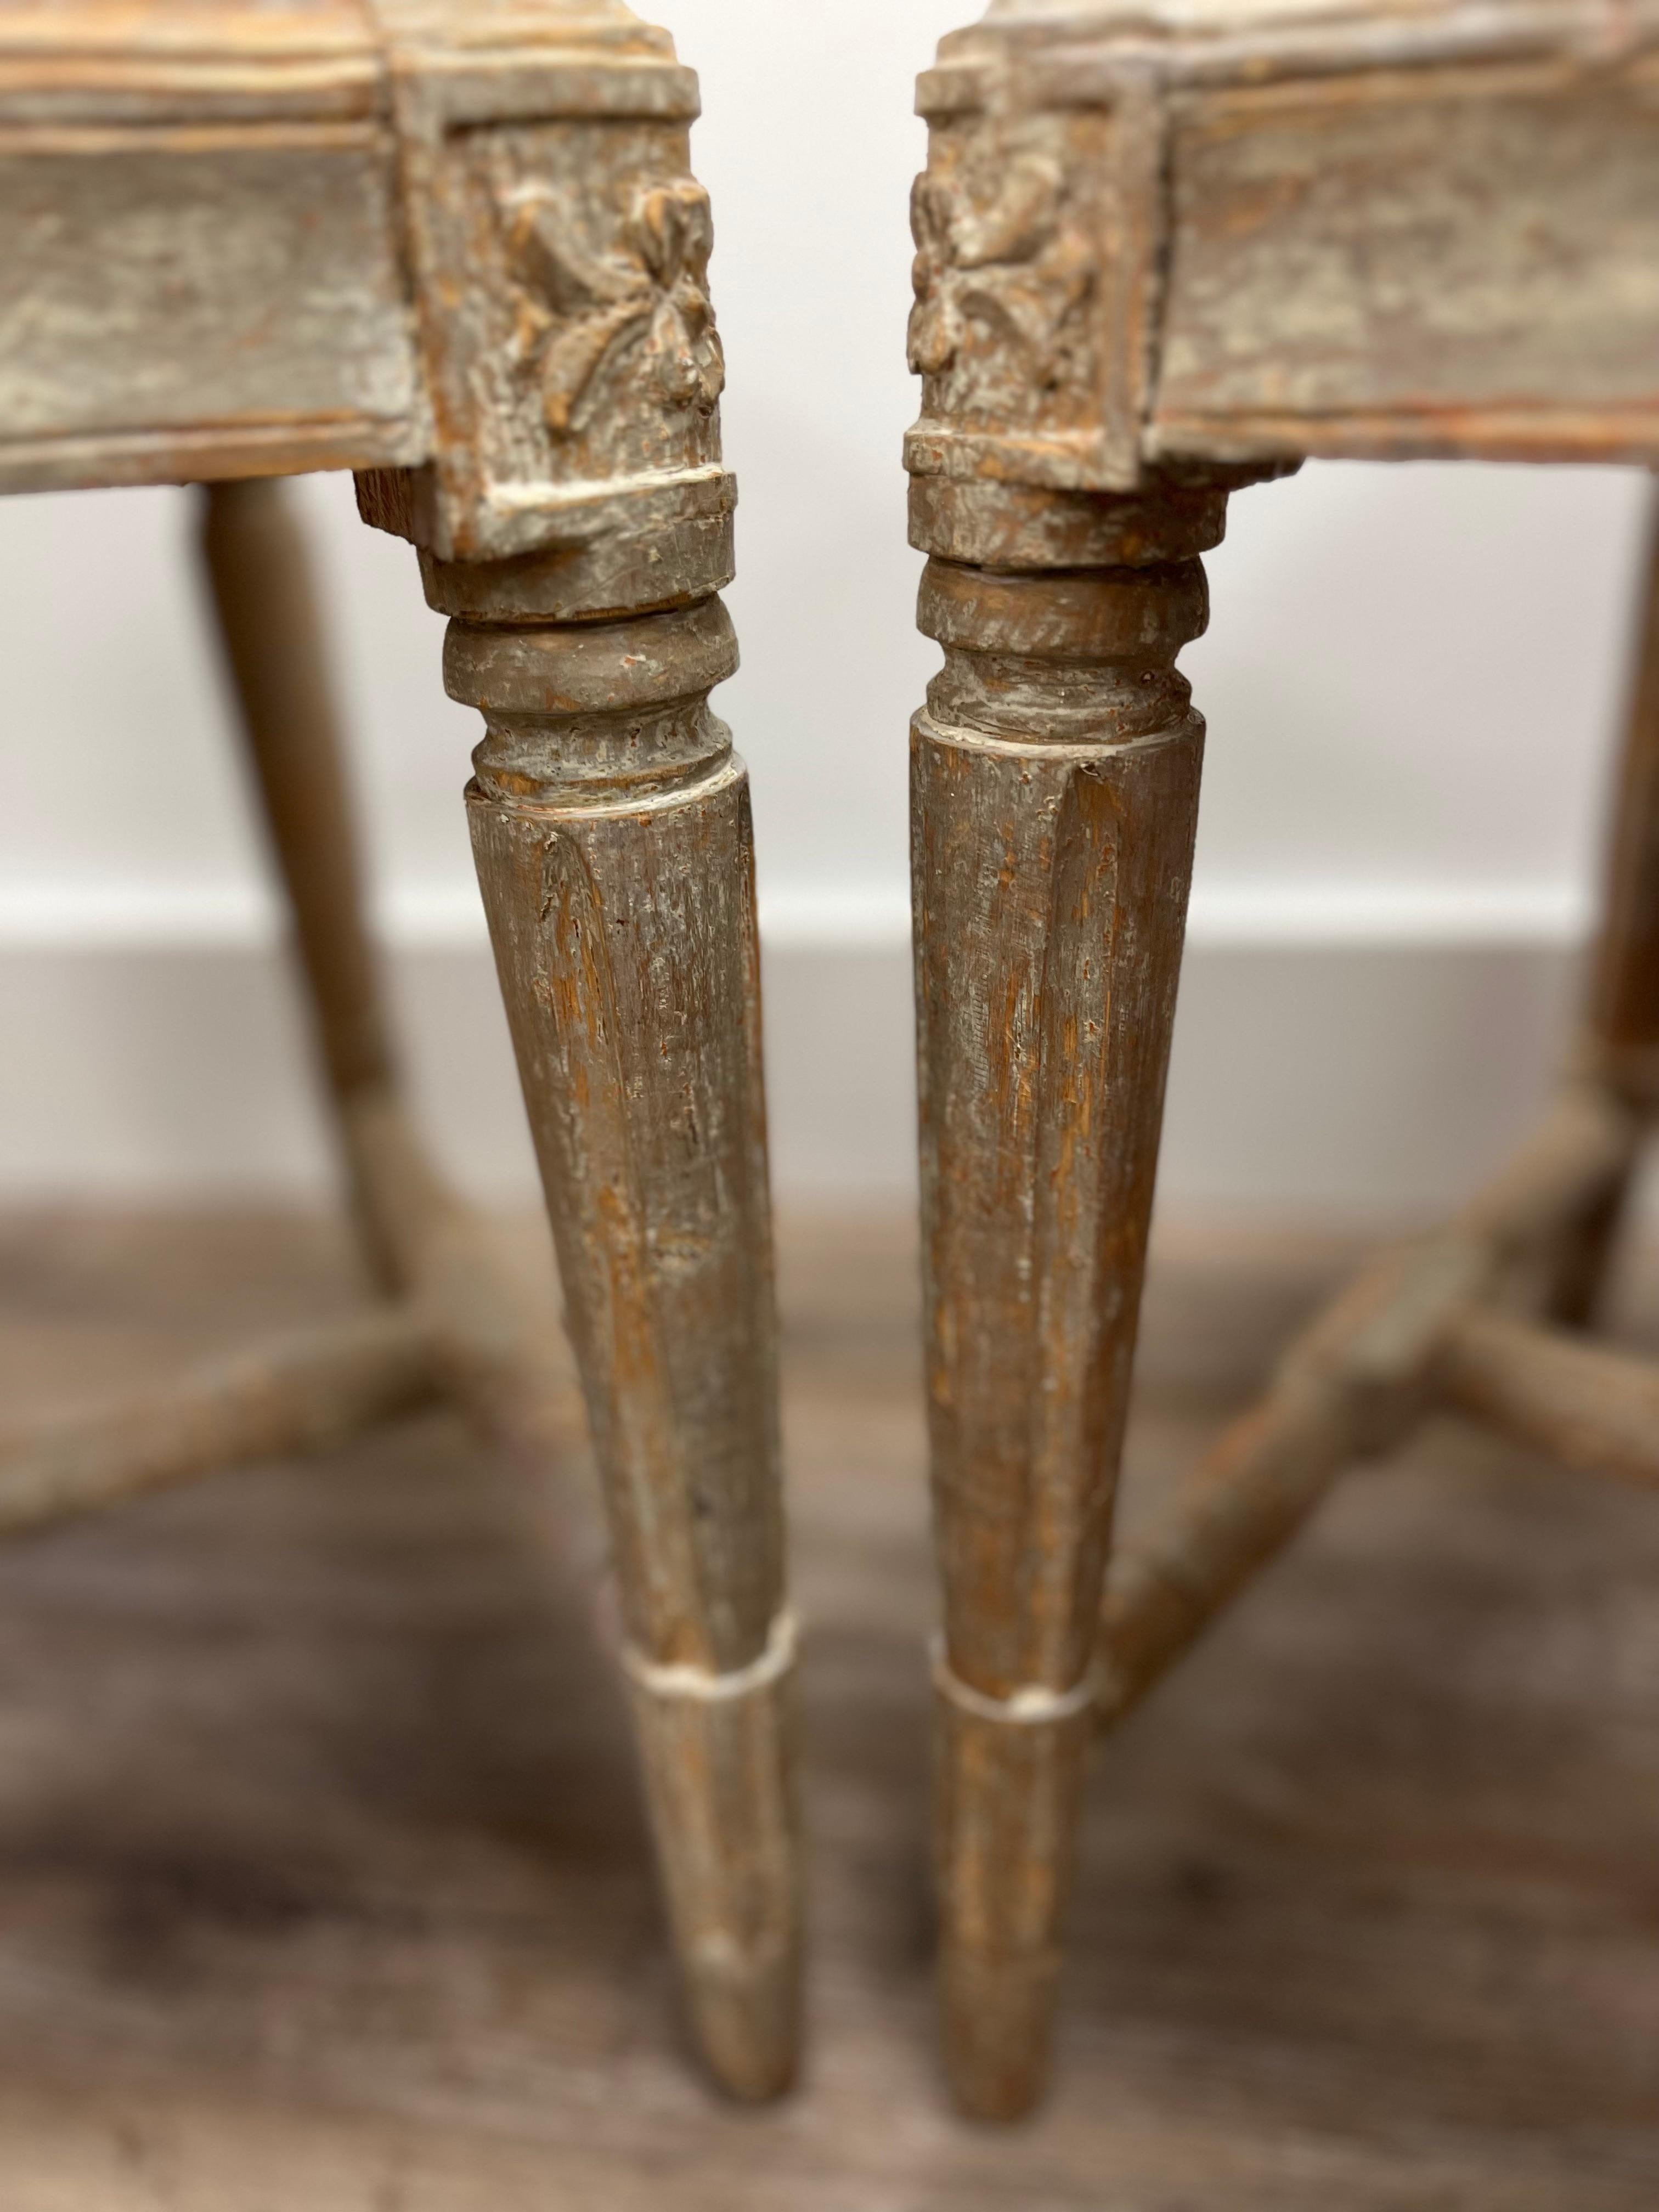 A pair of Swedish Gustavian footstools with rounded fleurons on the corners. The legs are turned, tapered and fluted. Supported by turned H-cross construction. This piece has been meticulously scraped to its original soft grey/blue color and